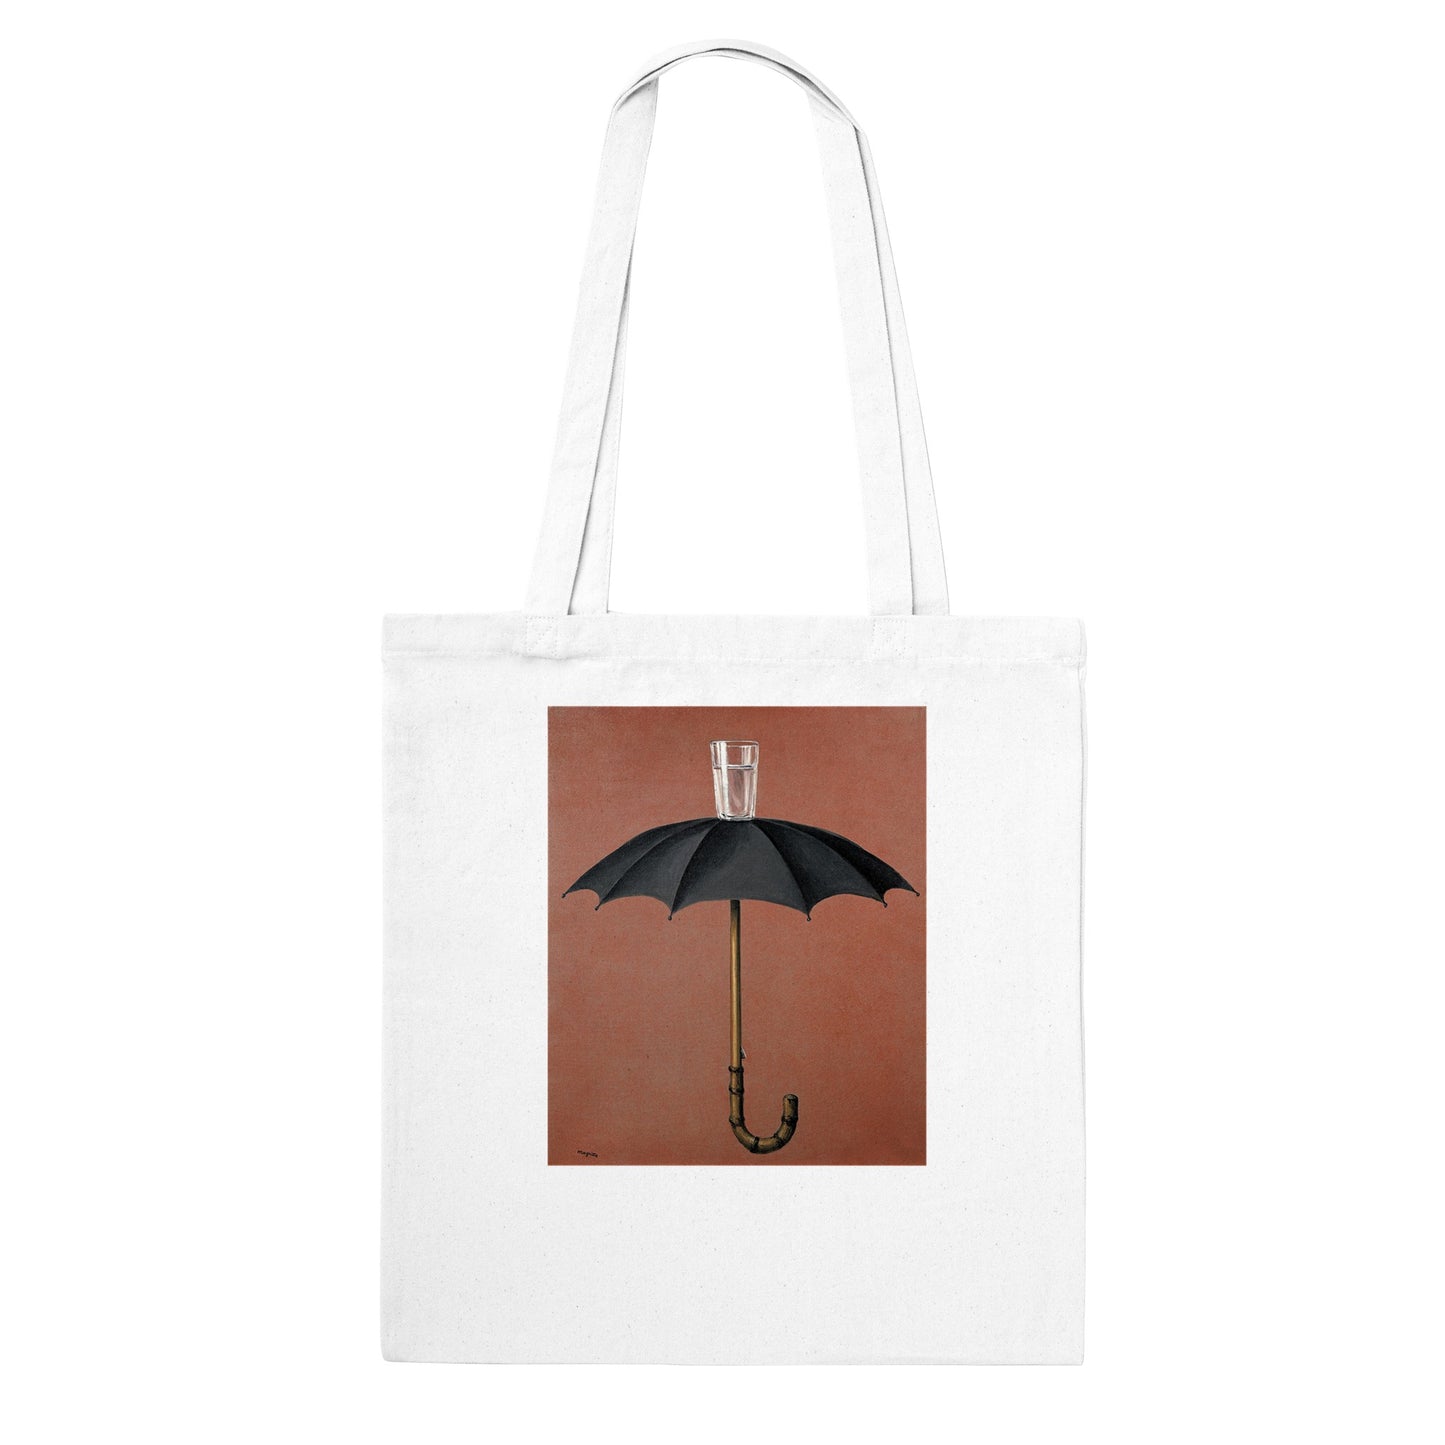 RENE MAGRITTE - HEGEL'S VACATION - CLASSIC TOTE BAG